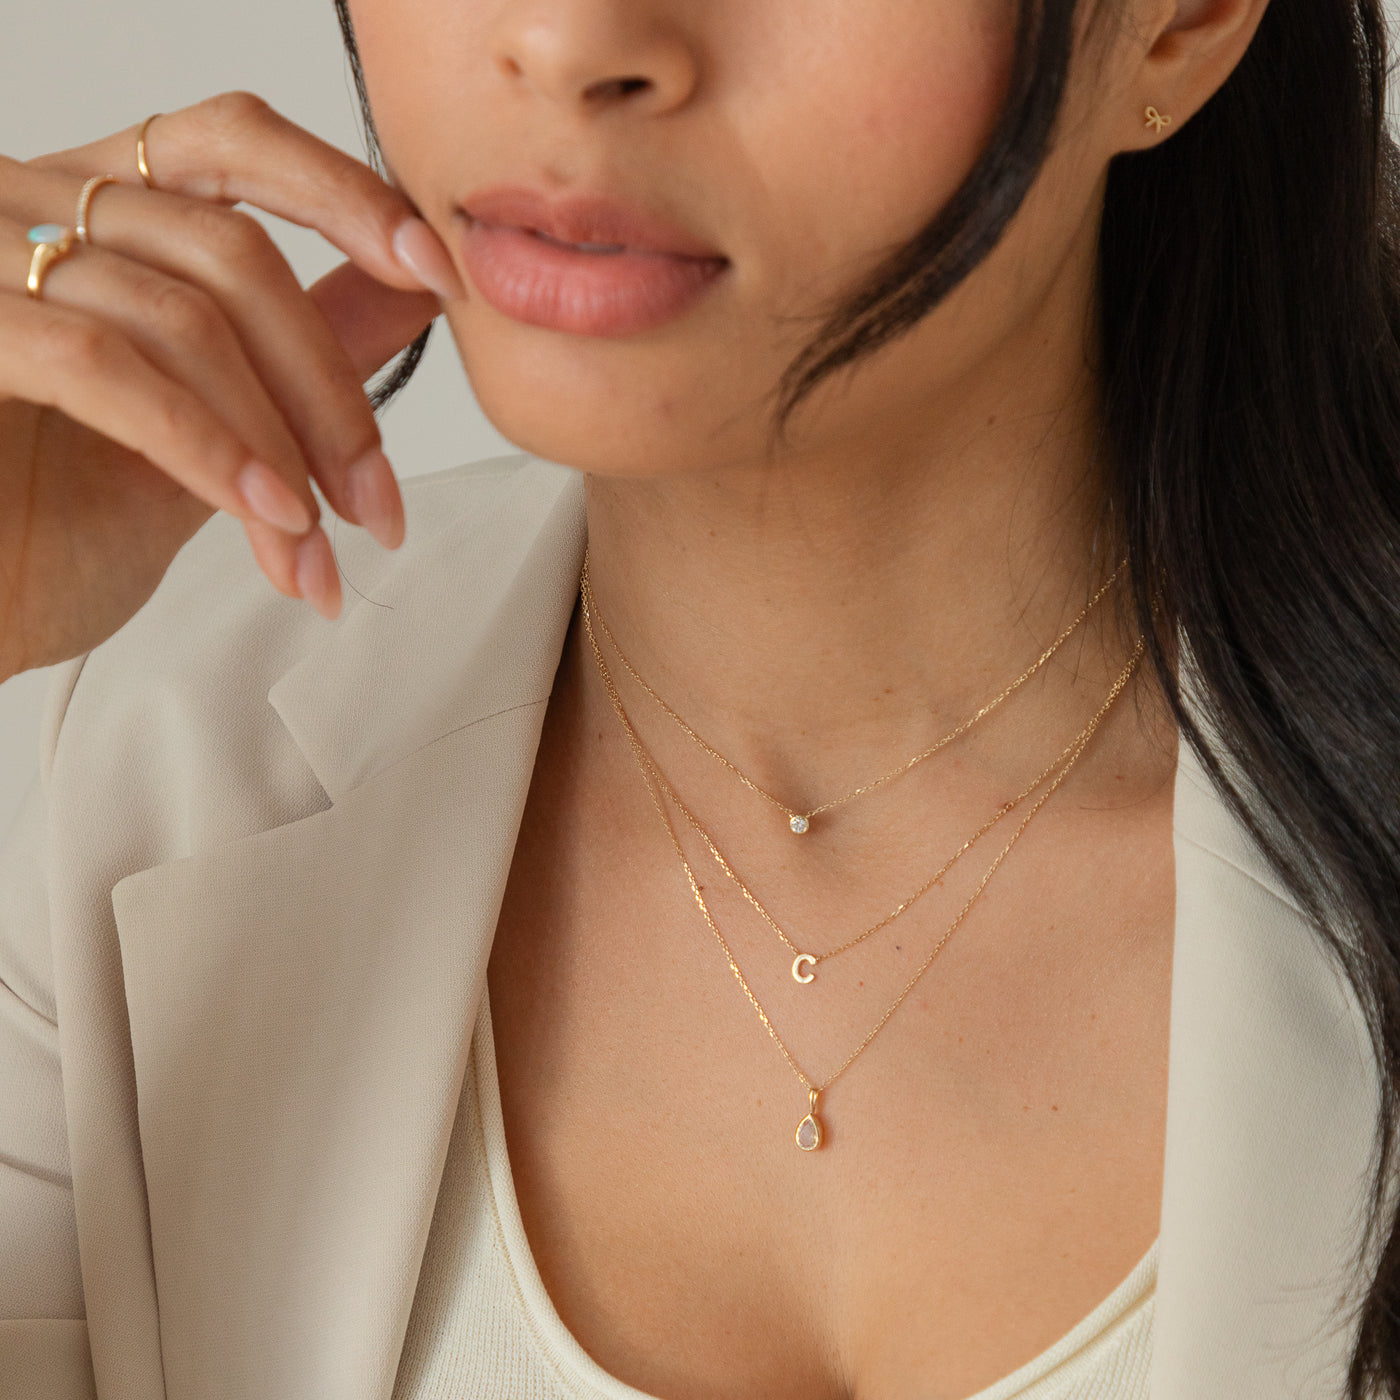 A B C D E F G H I J K L M N O P Q R S T U V W X Y Z Tiny Initial Necklace - 14k Solid Gold